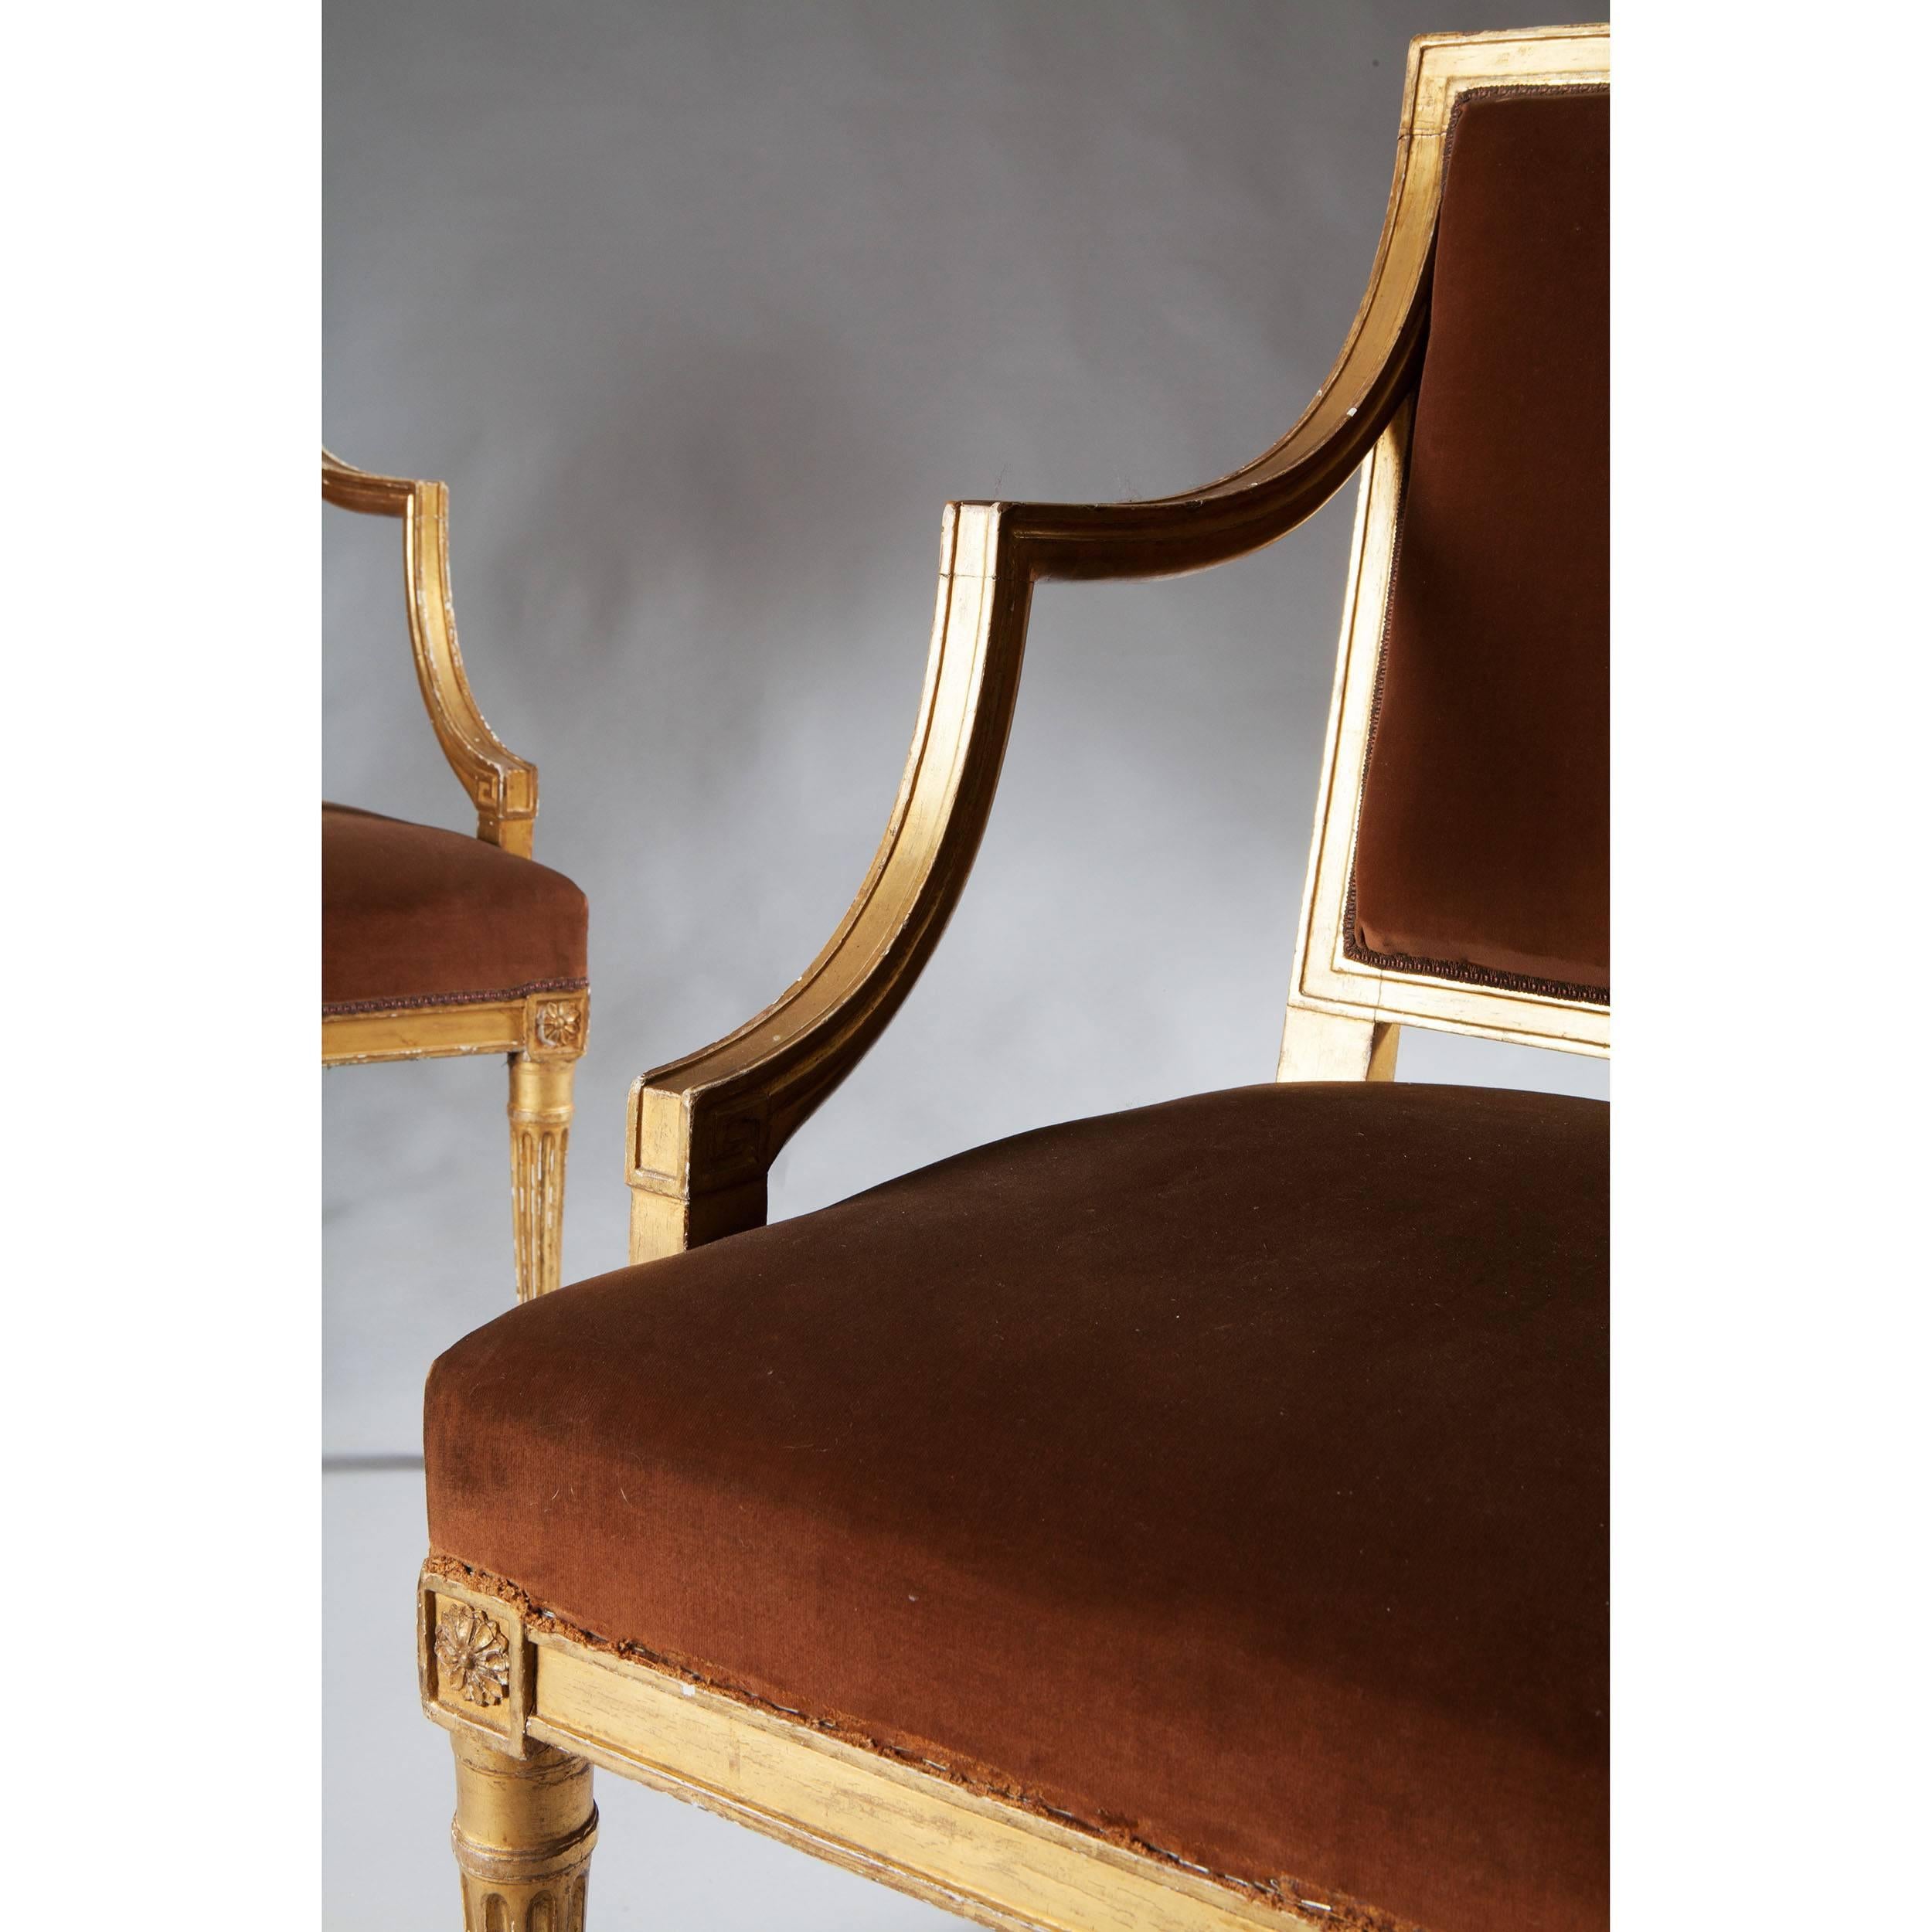 England, circa 1780.
​
A fine pair of late 18th century neoclassical giltwood armchairs, the gadrooned frames with open arms and raised on tapering fluted legs.

Please see photographs for condition. 
Measures:
Height 36 1/2 inches